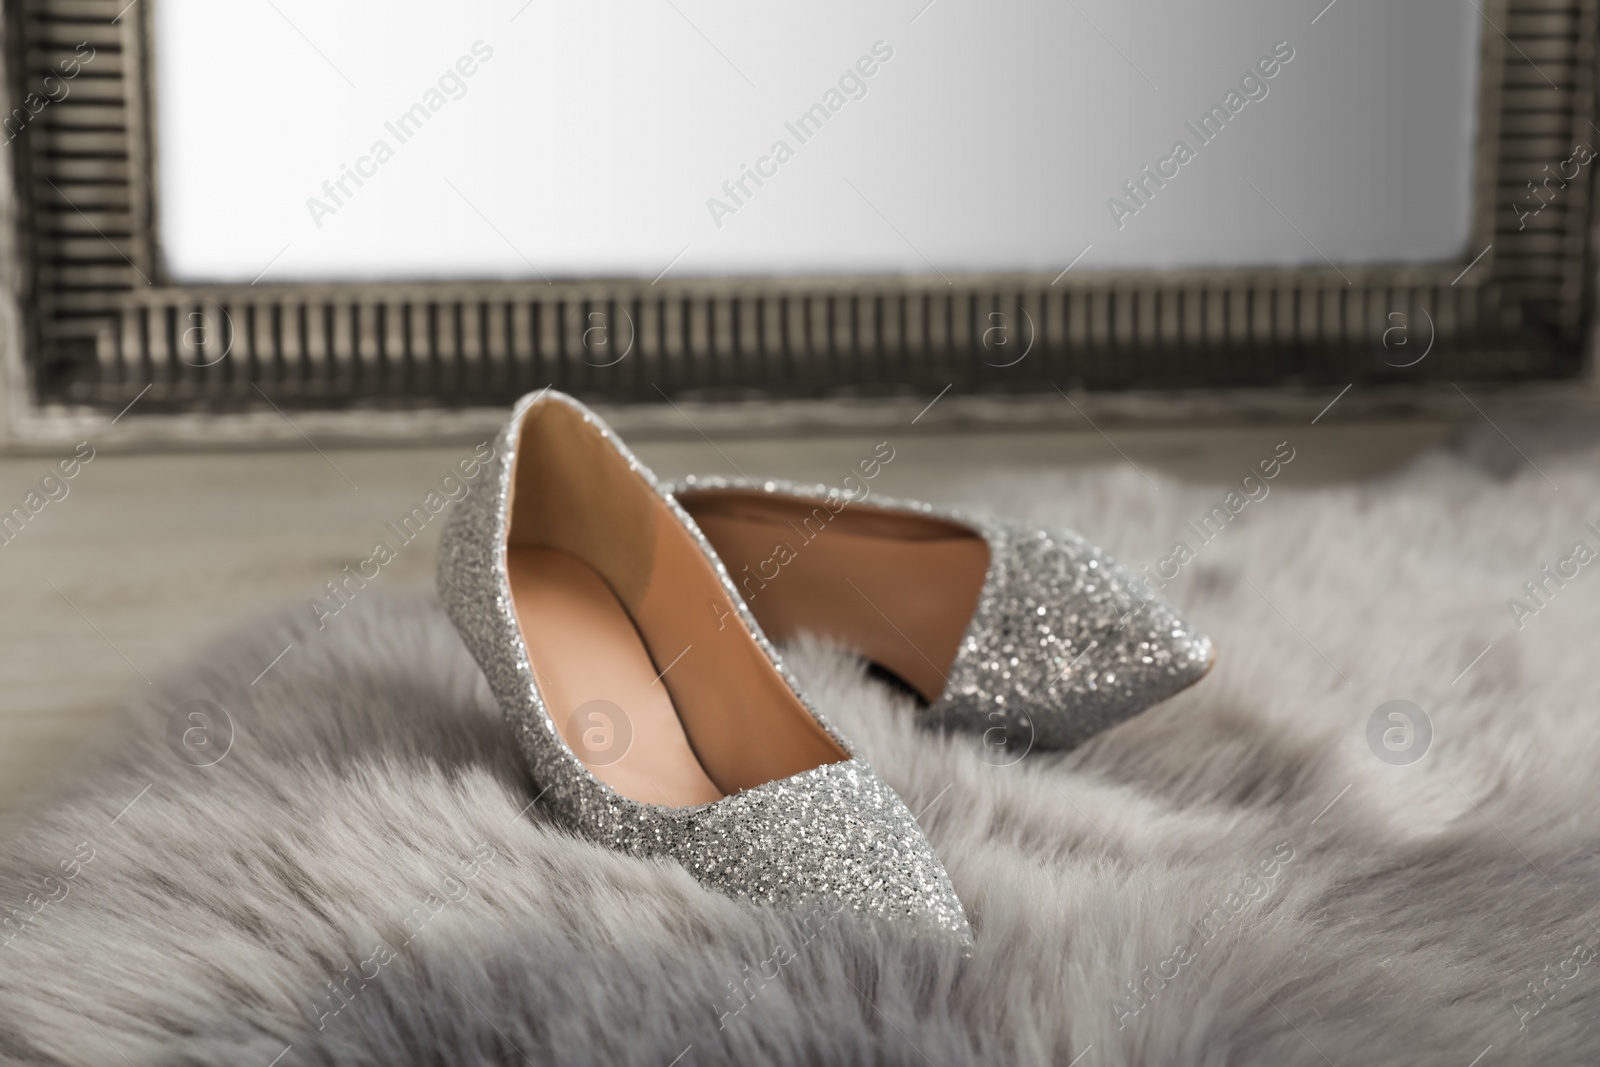 Photo of Stylish shiny high heeled shoes on faux fur near mirror in room